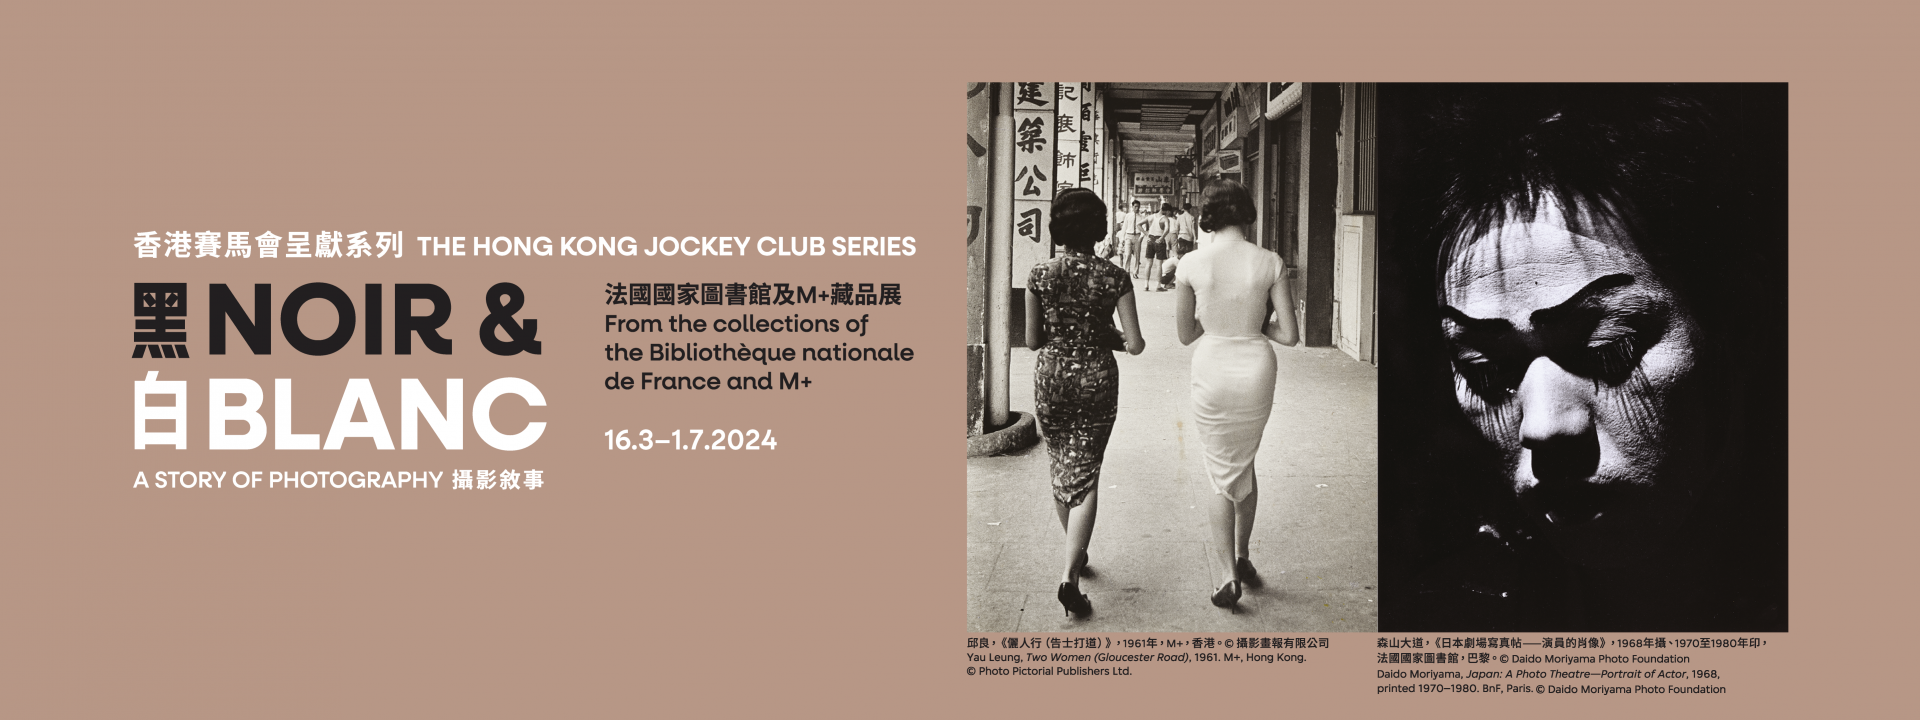 The Hong Kong Jockey Club Series: Noir & Blanc—A Story of Photography   From the collections of Bibliothèque nationale de France and M+ 